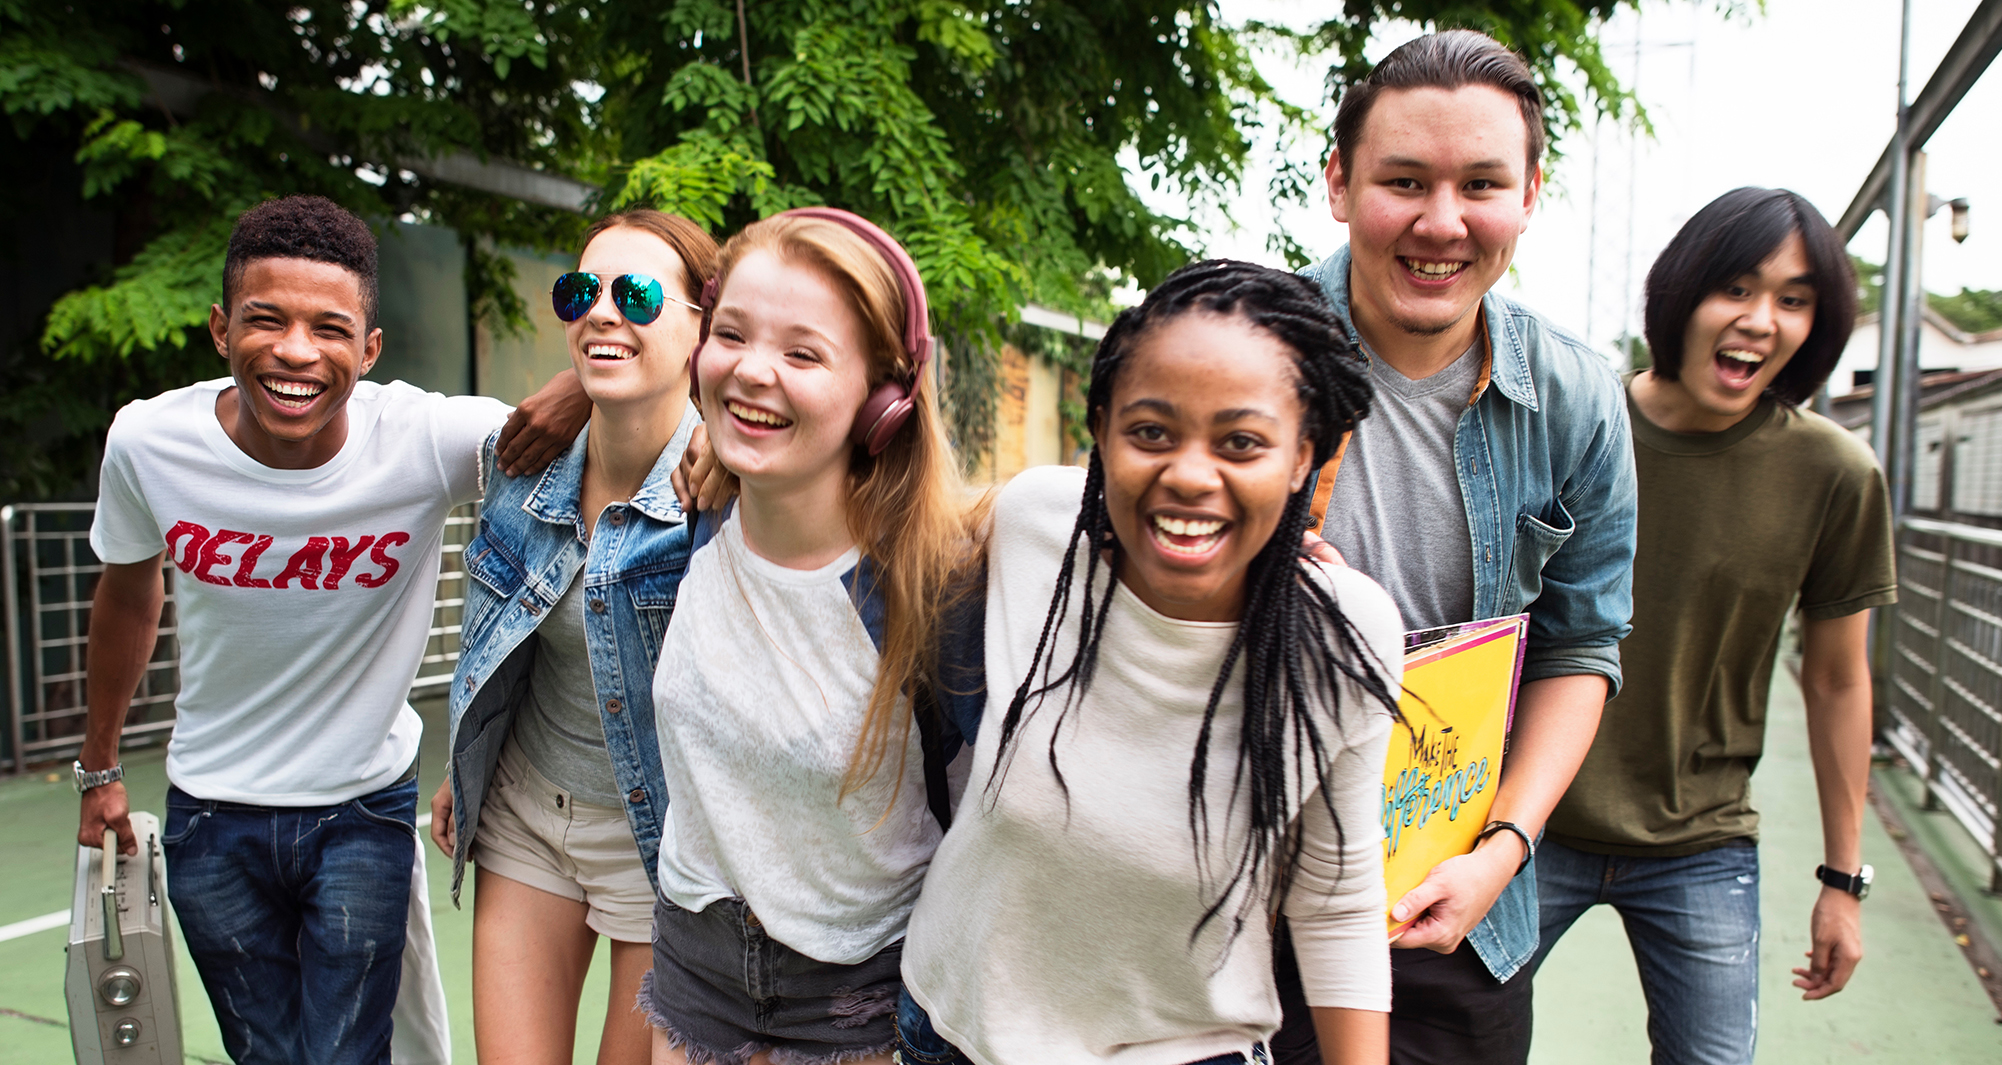 A diverse group of teenagers walking together and smiling at the camera.